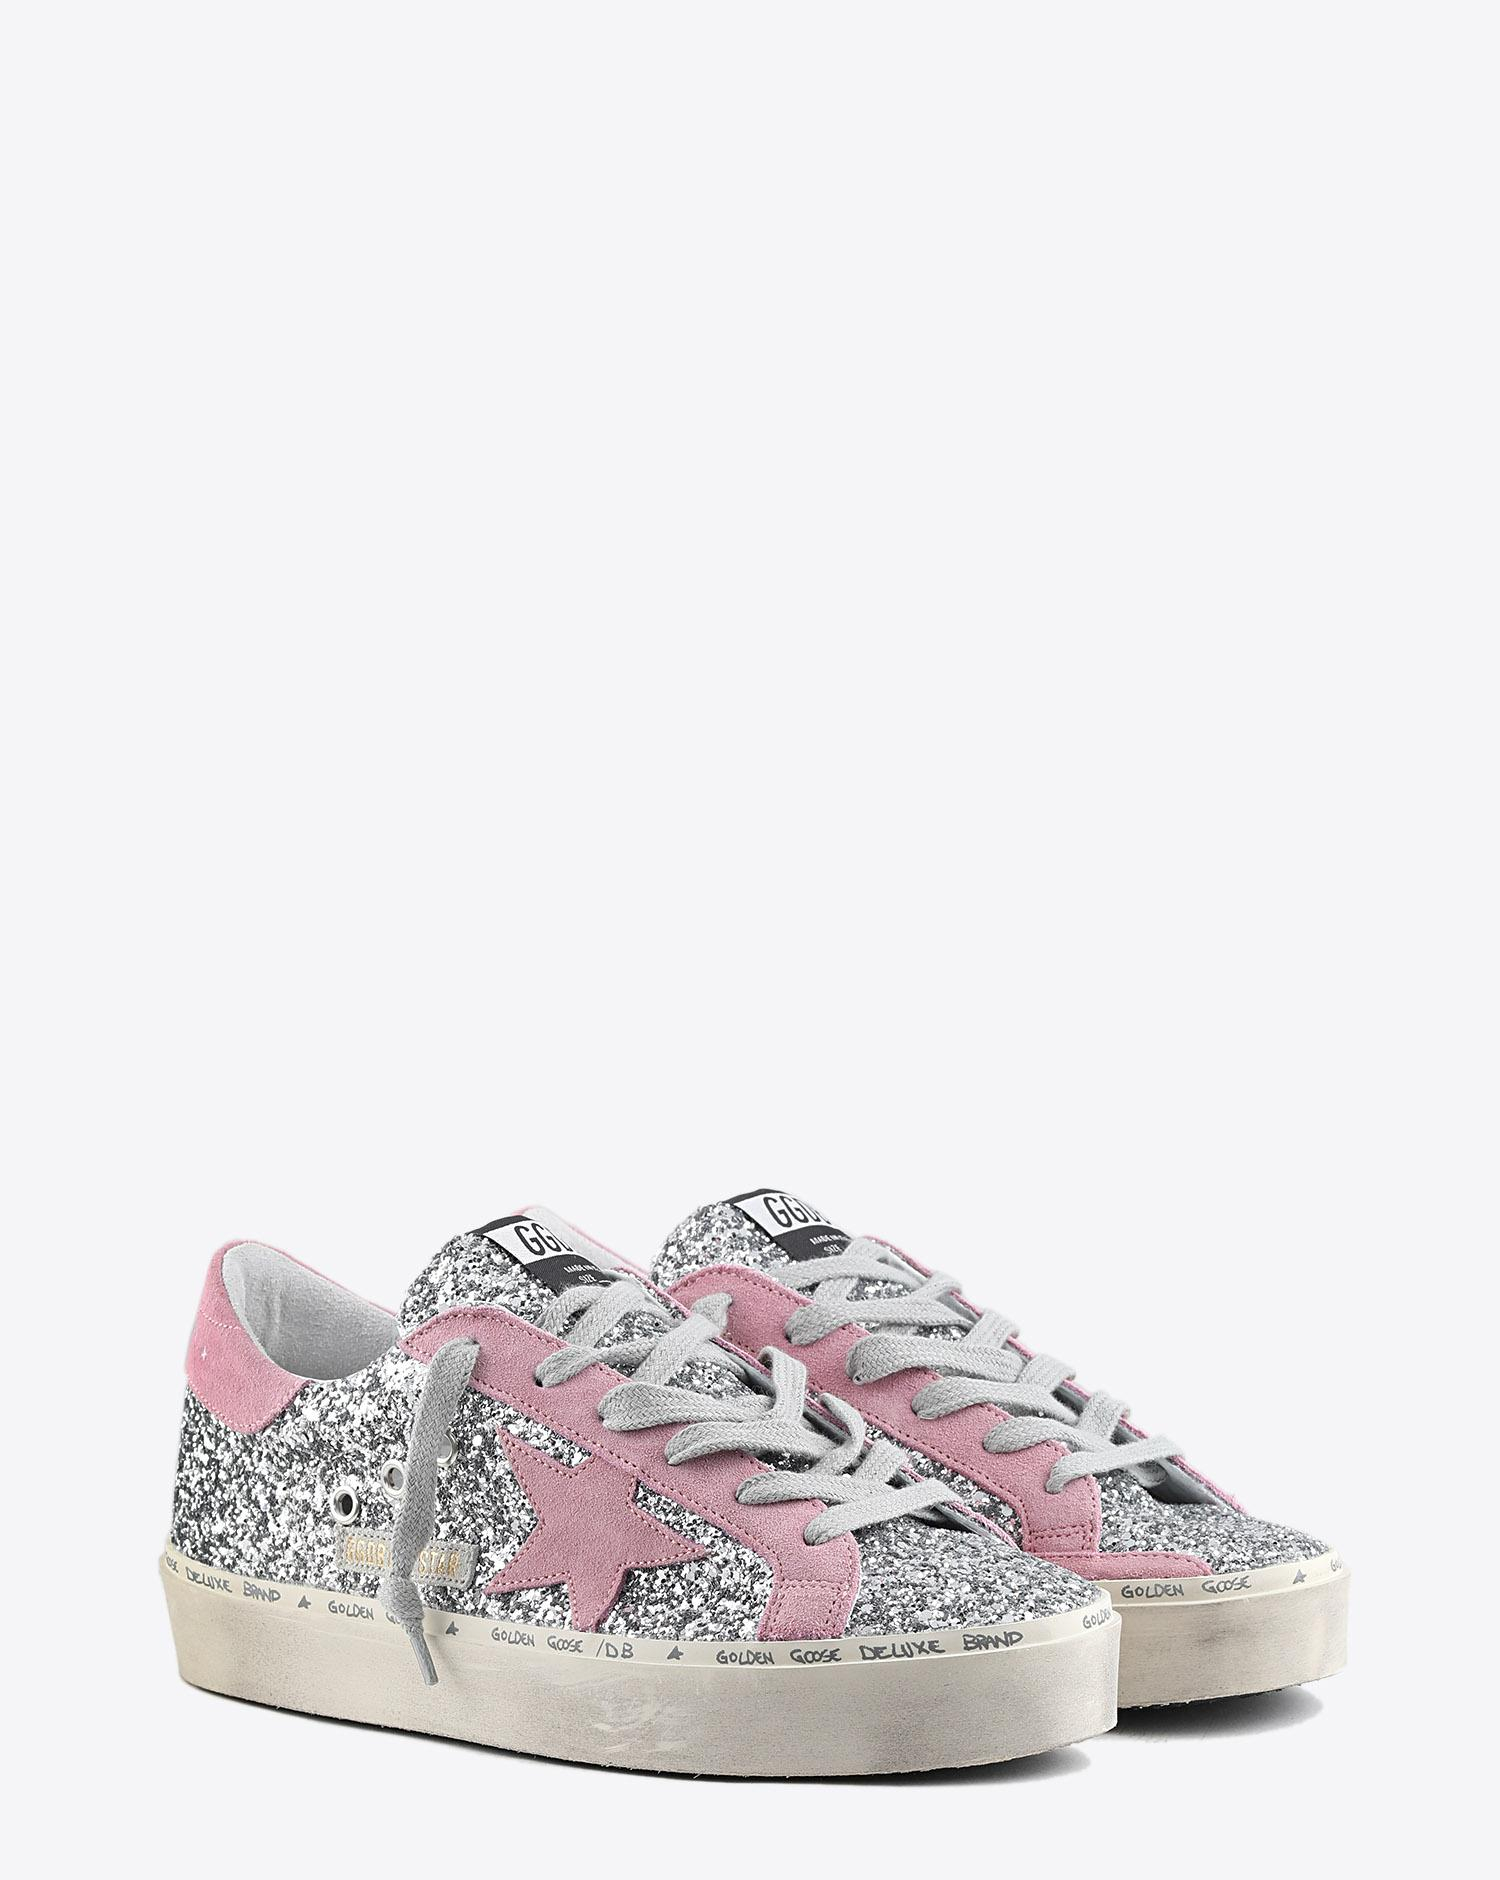 Golden Goose Woman Pré-Collection Sneakers Hi Star - Silver Glitter - Pink Suede Star   